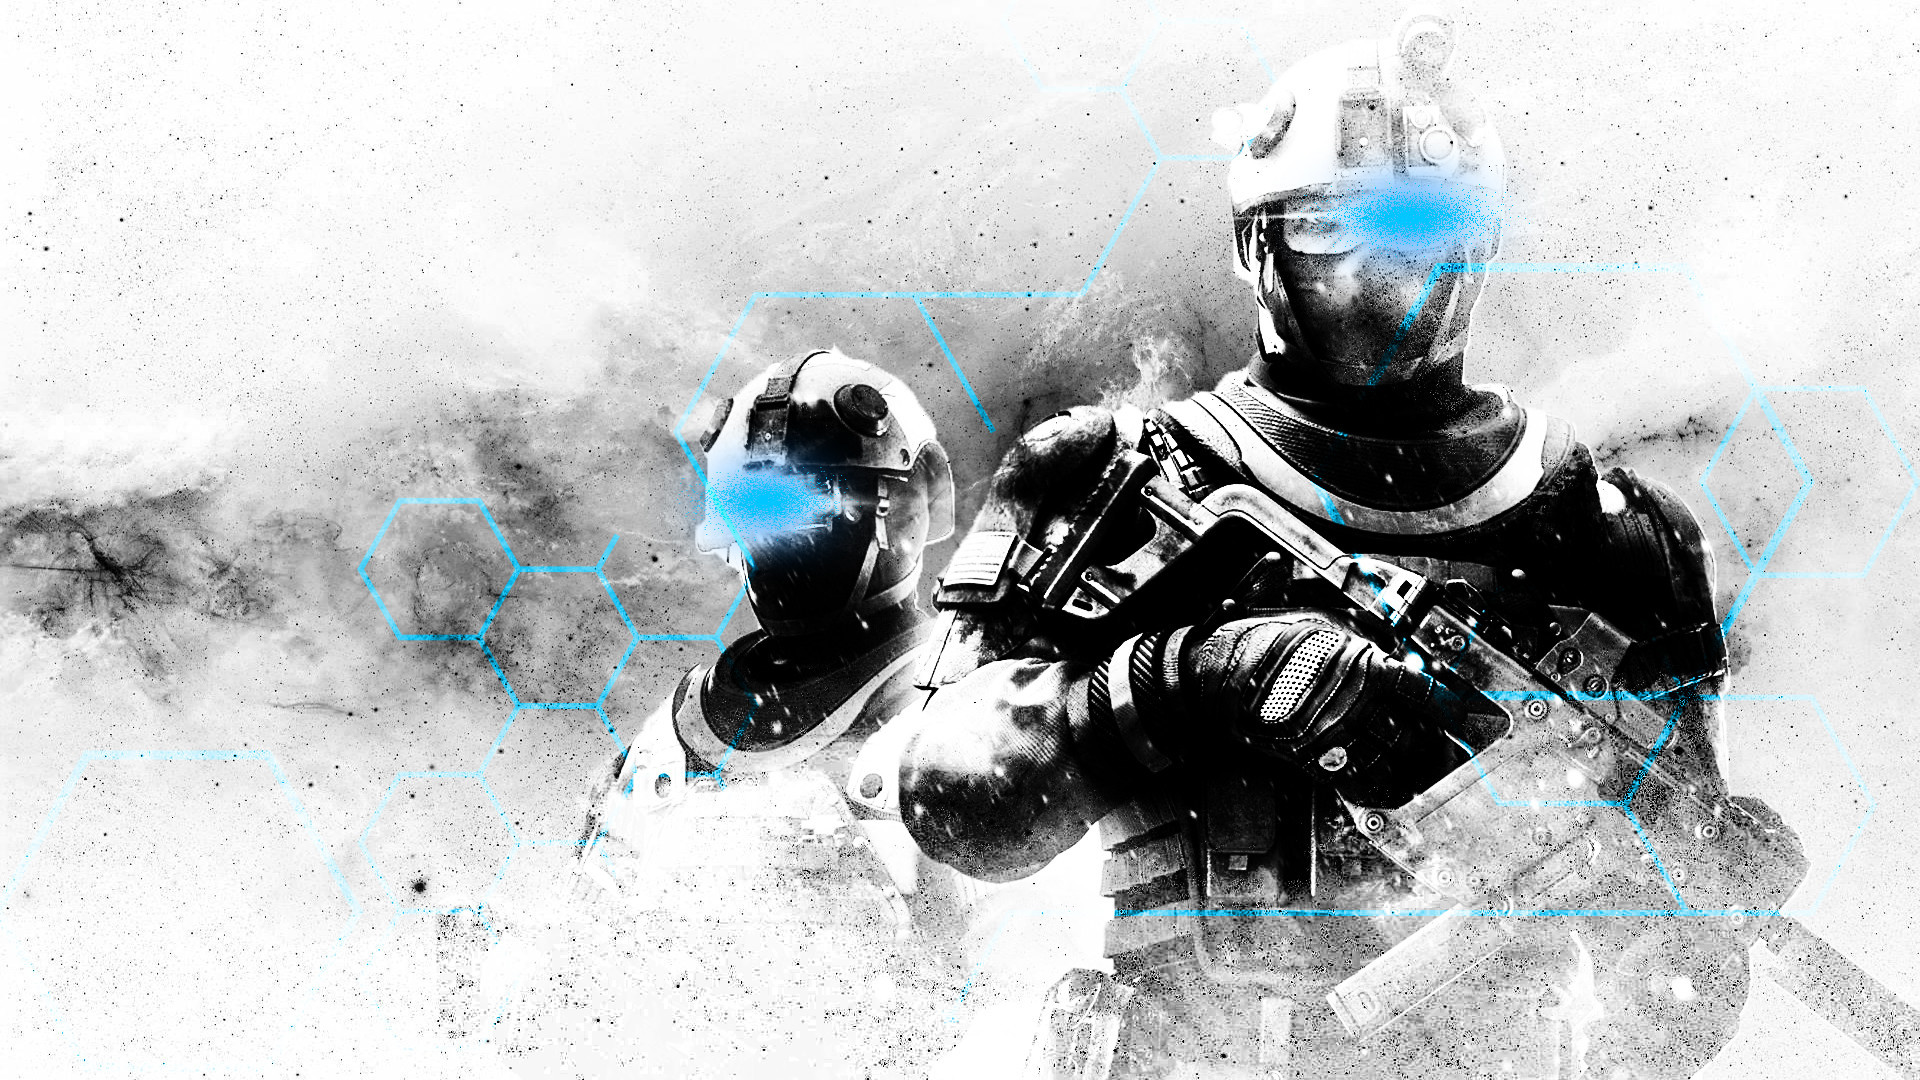 1920x1080 ... Tom Clancy's Ghost Recon Future Soldier Wallpaper by NIHILUSDESIGNS